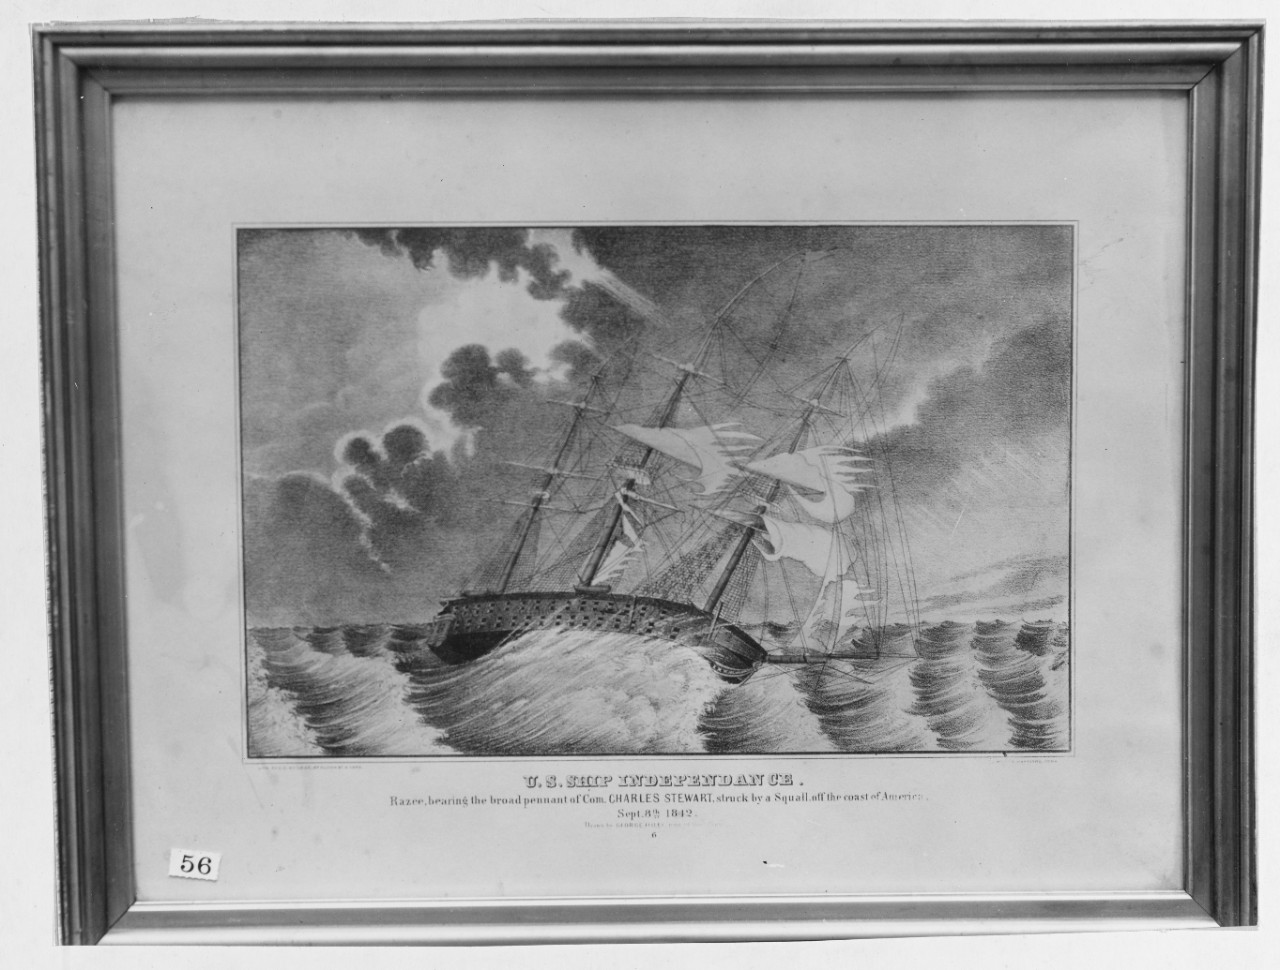 US Ship INDEPENDENCE, 1814-1913